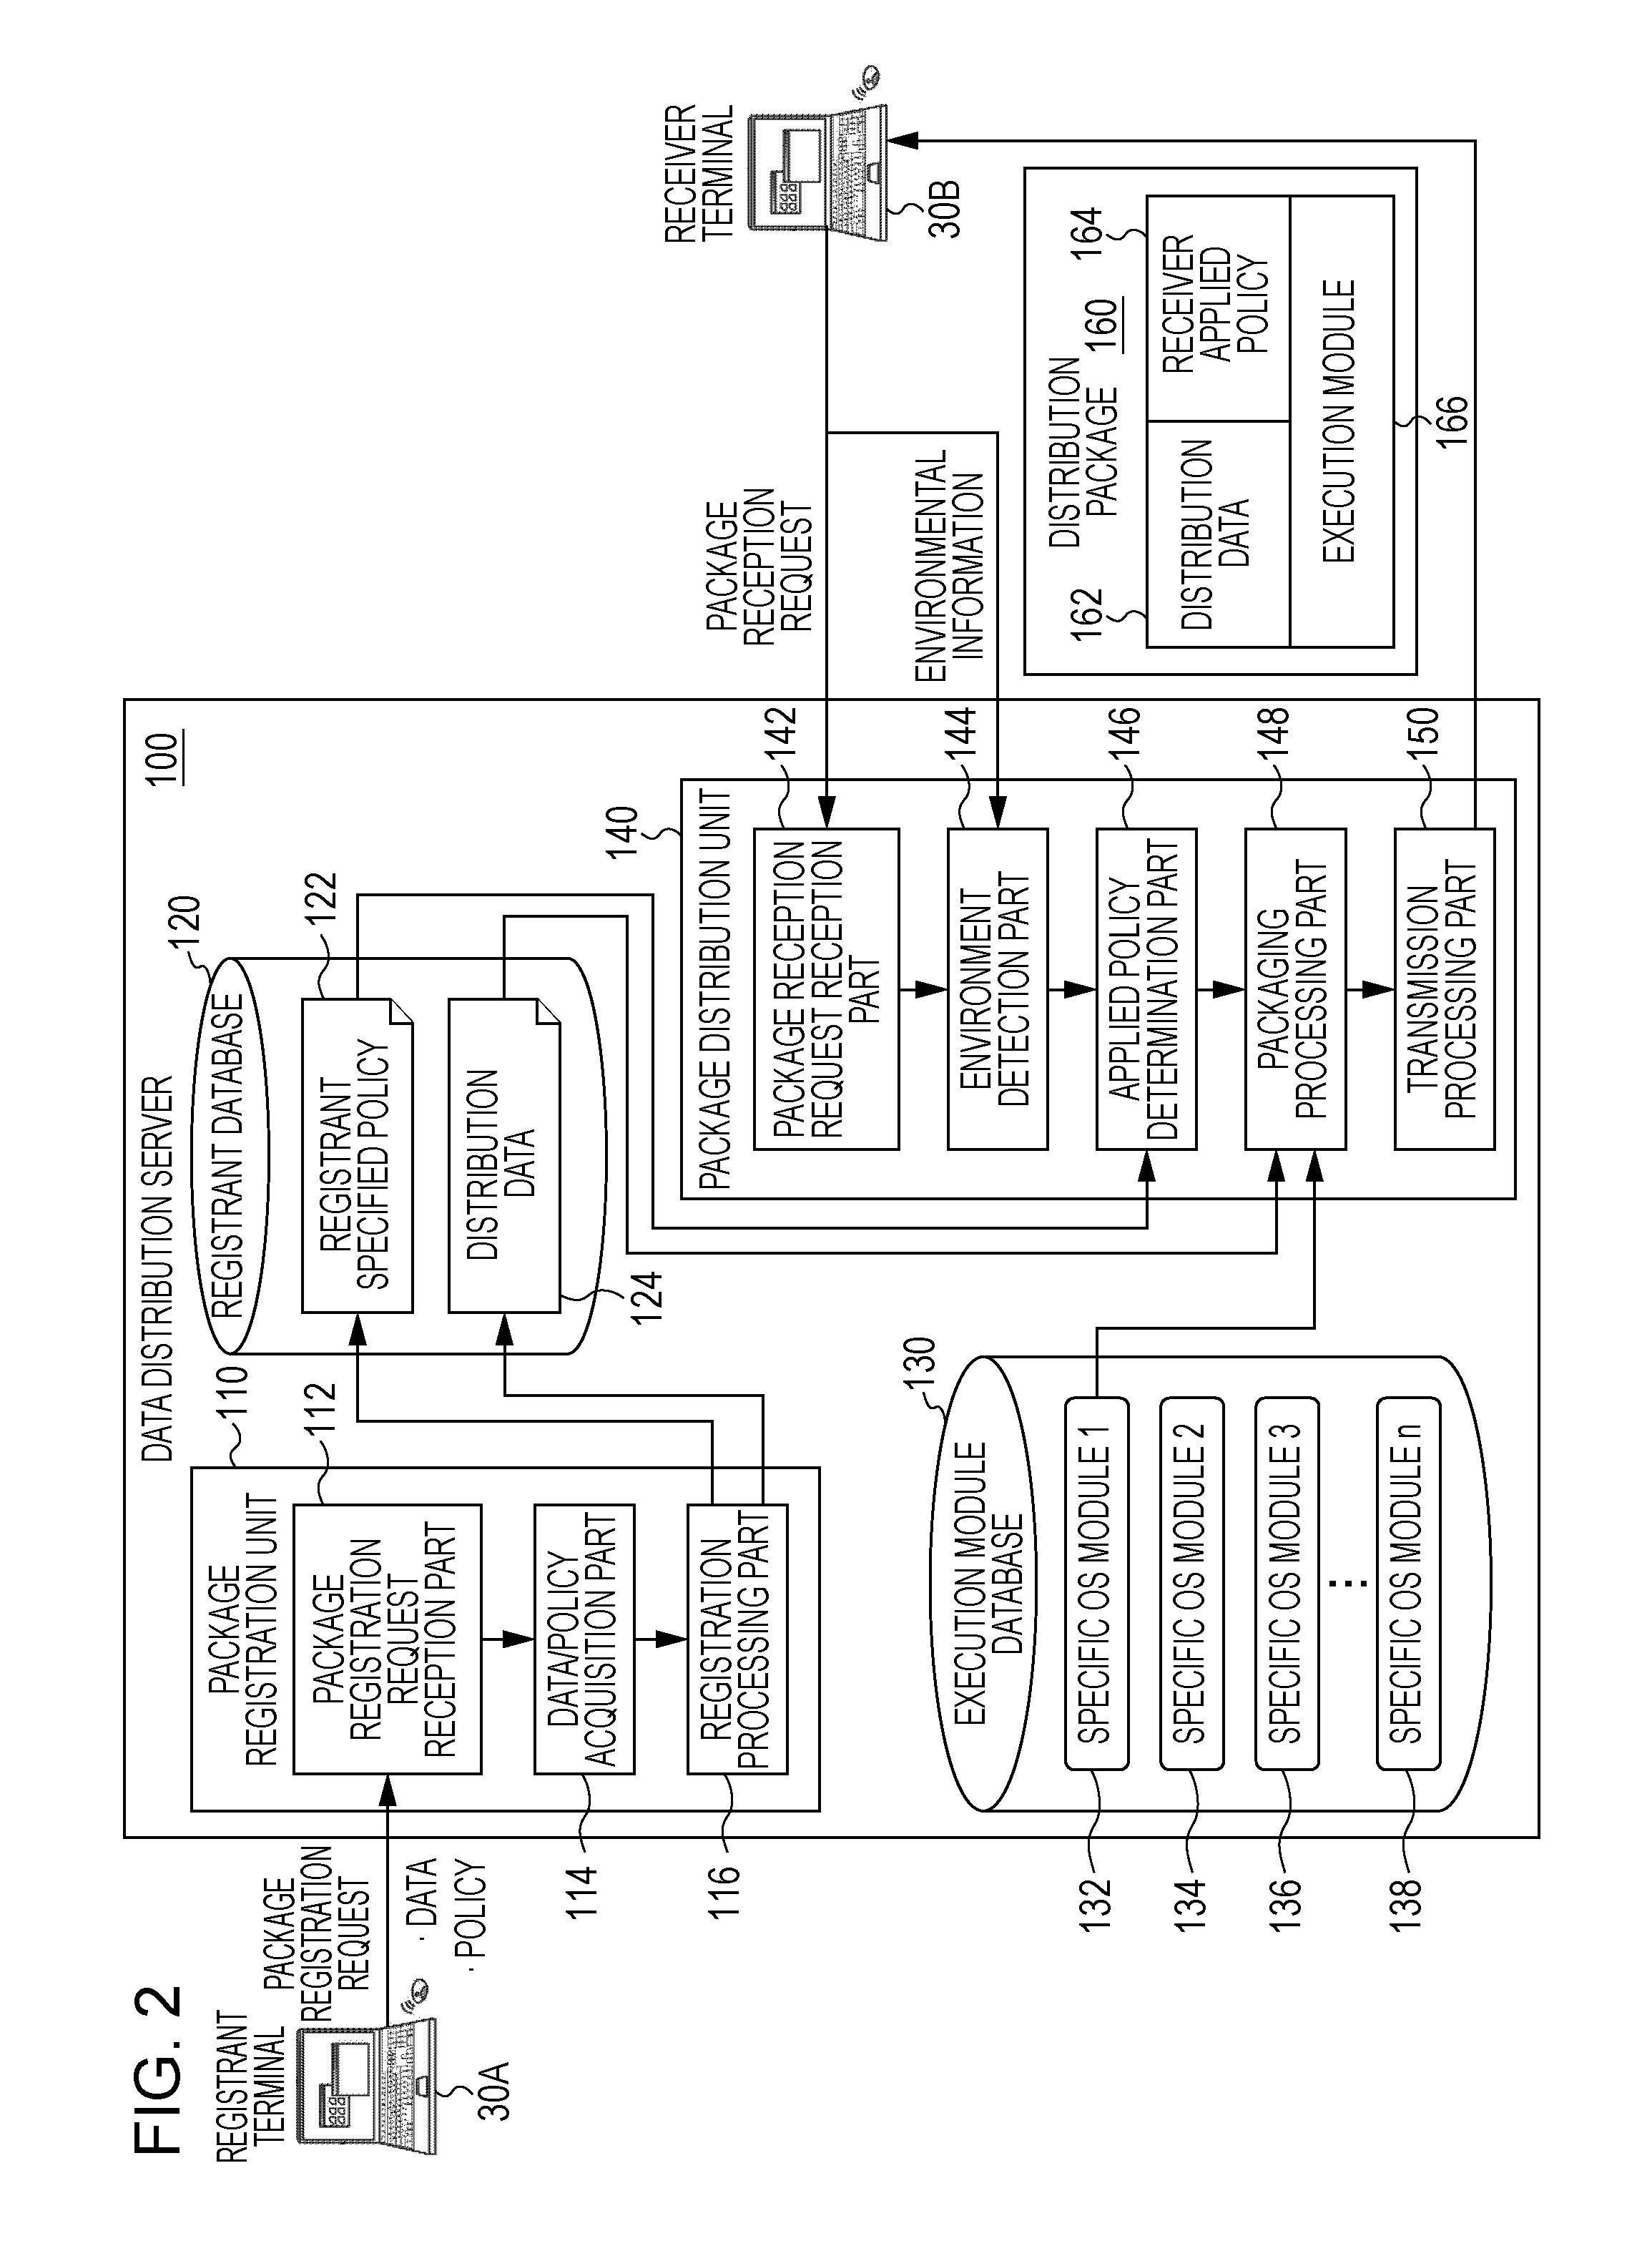 Generating a distrubition package having an access control execution program for implementing an access control mechanism and loading unit for a client